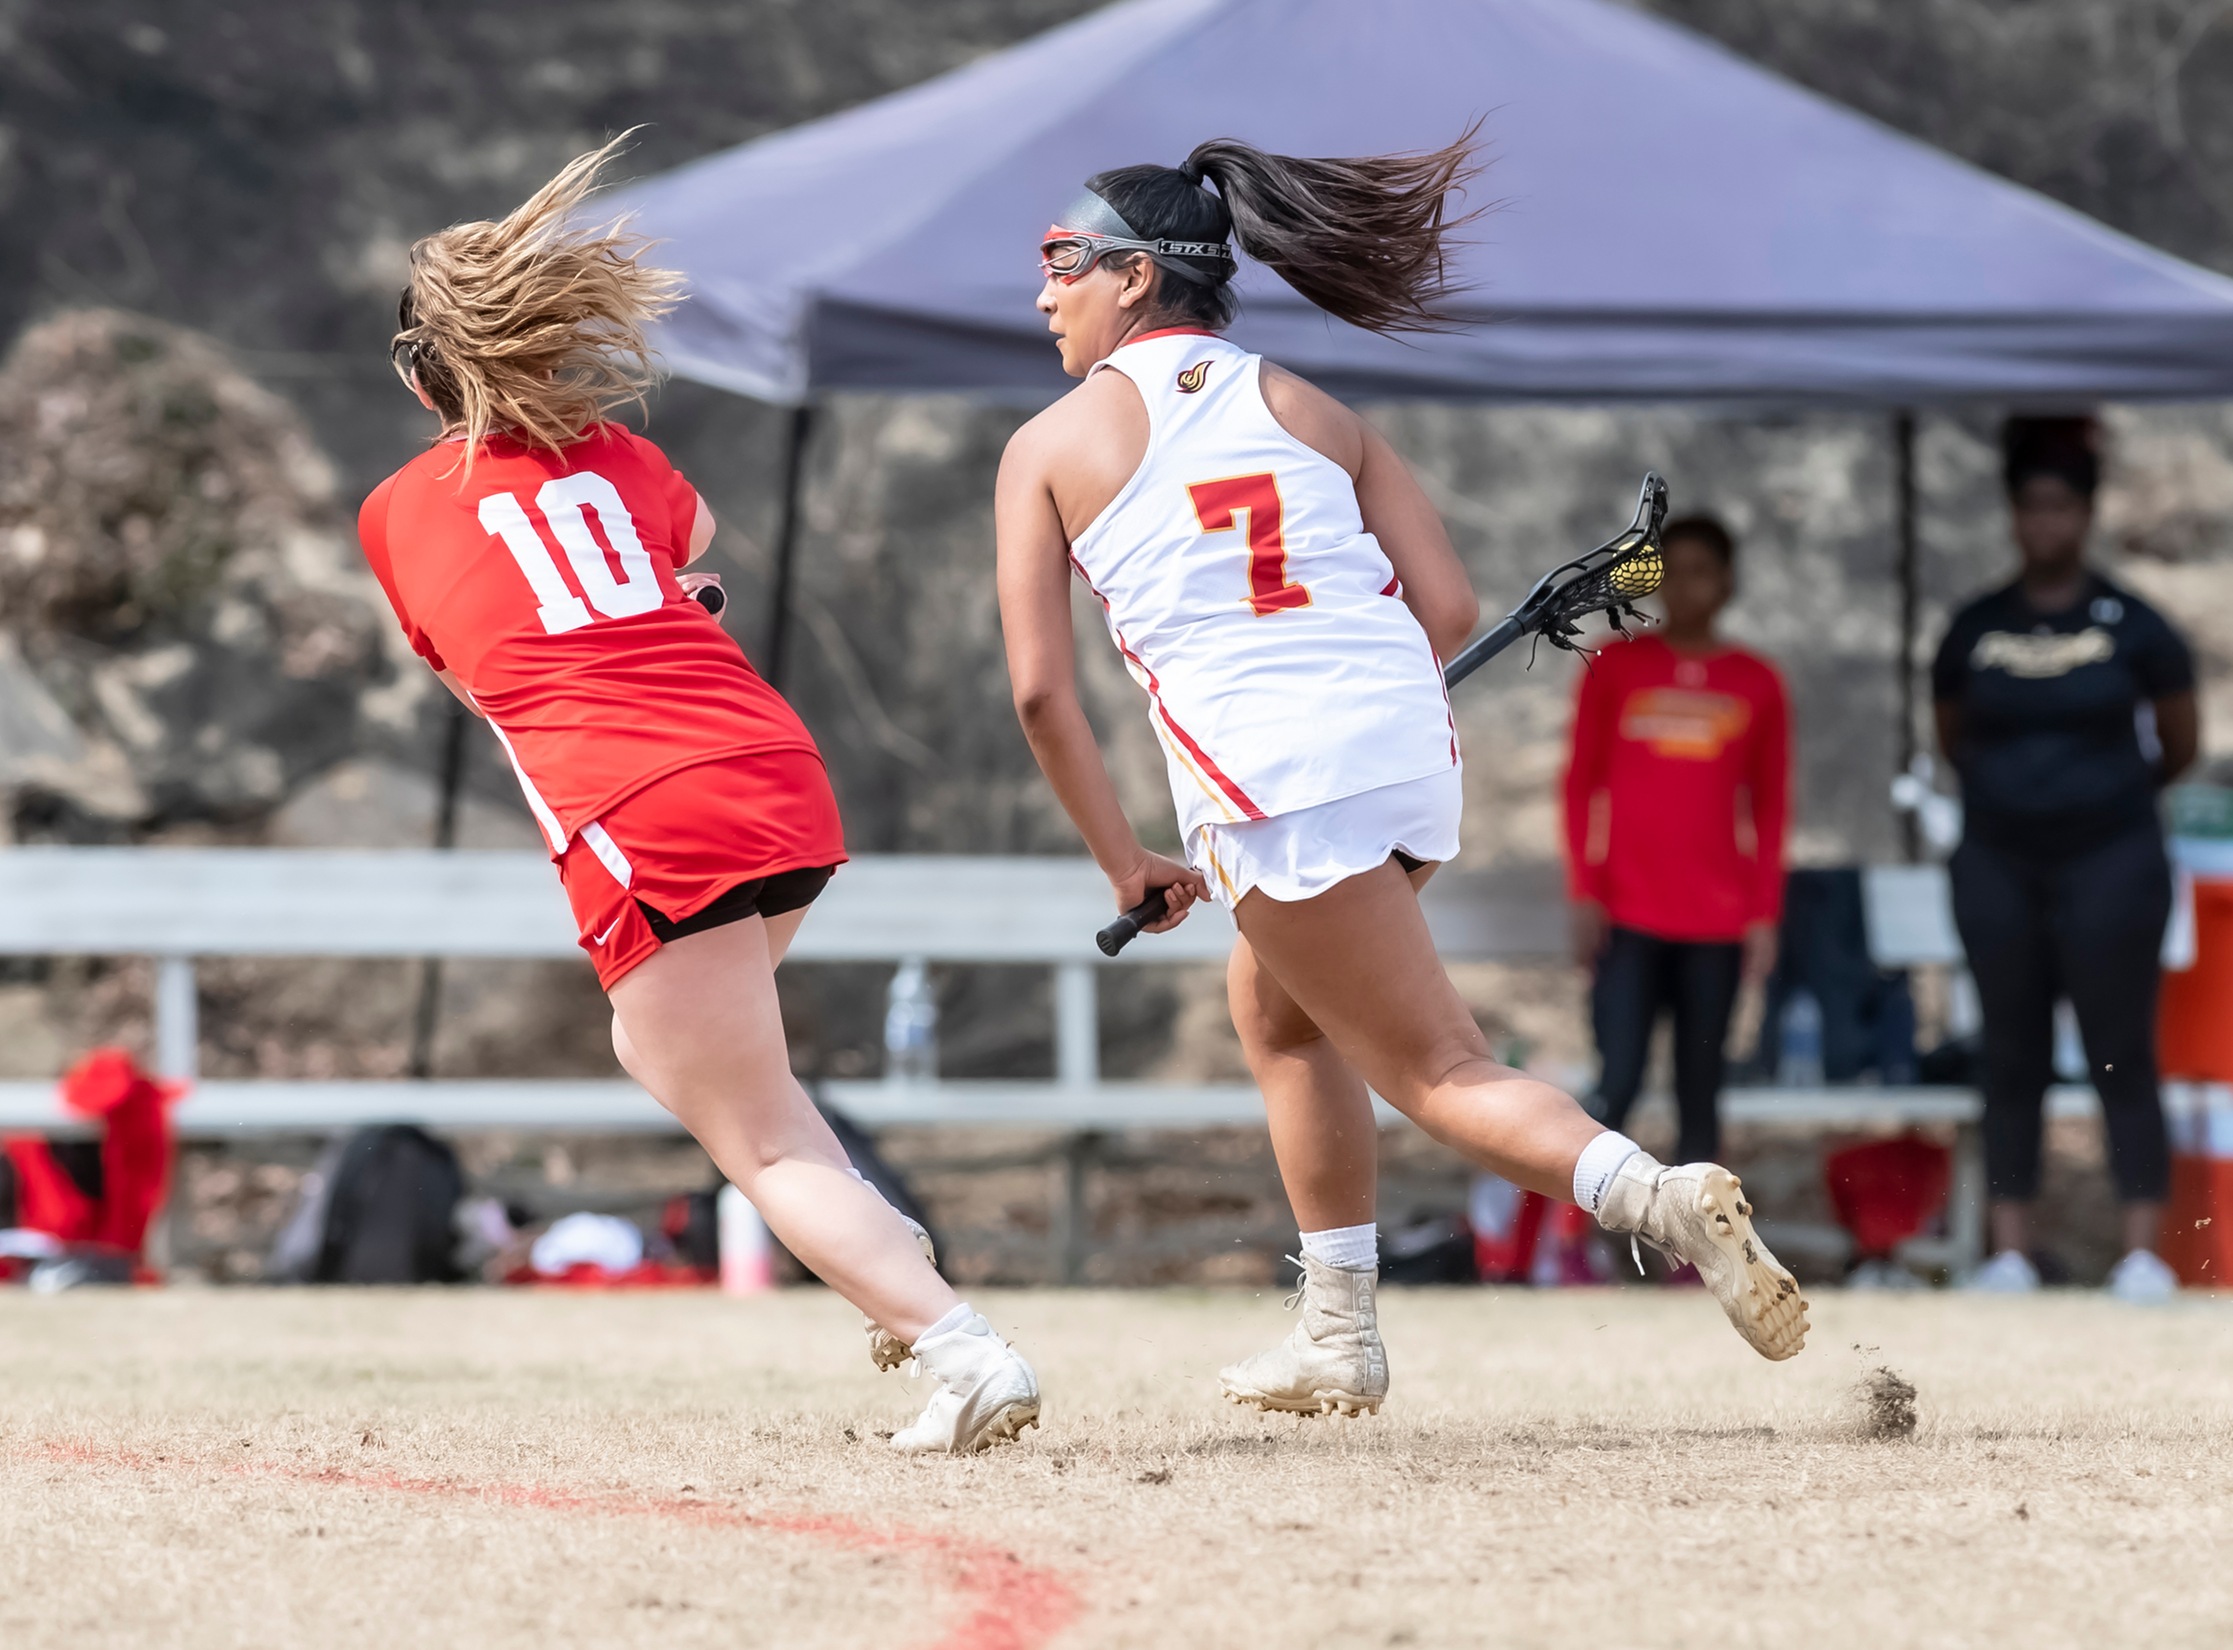 Lopez led the Firebirds with two goals.